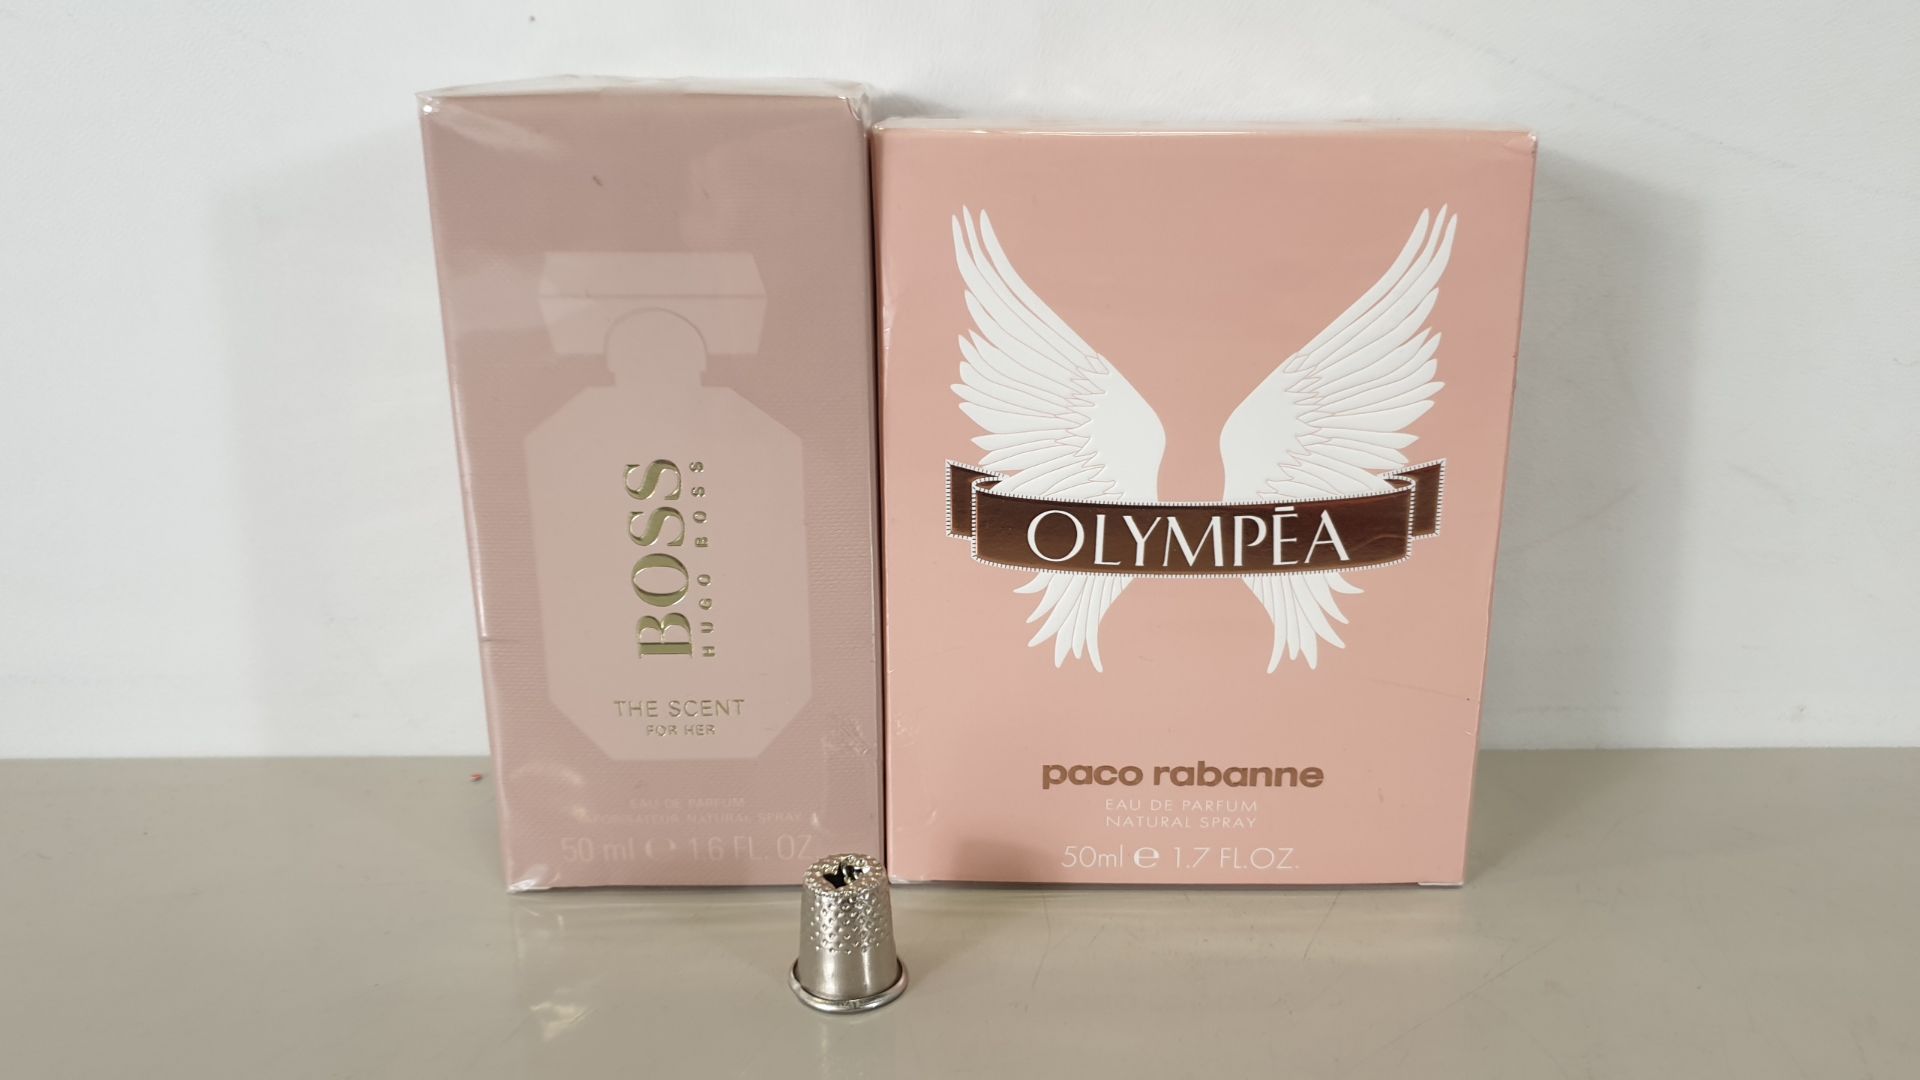 5 PIECE ASSORTED PERFUME LOT CONTAINING 2 X BRAND NEW BOXED 5OML HUGO BOSS THE SCENT FOR HER EAU